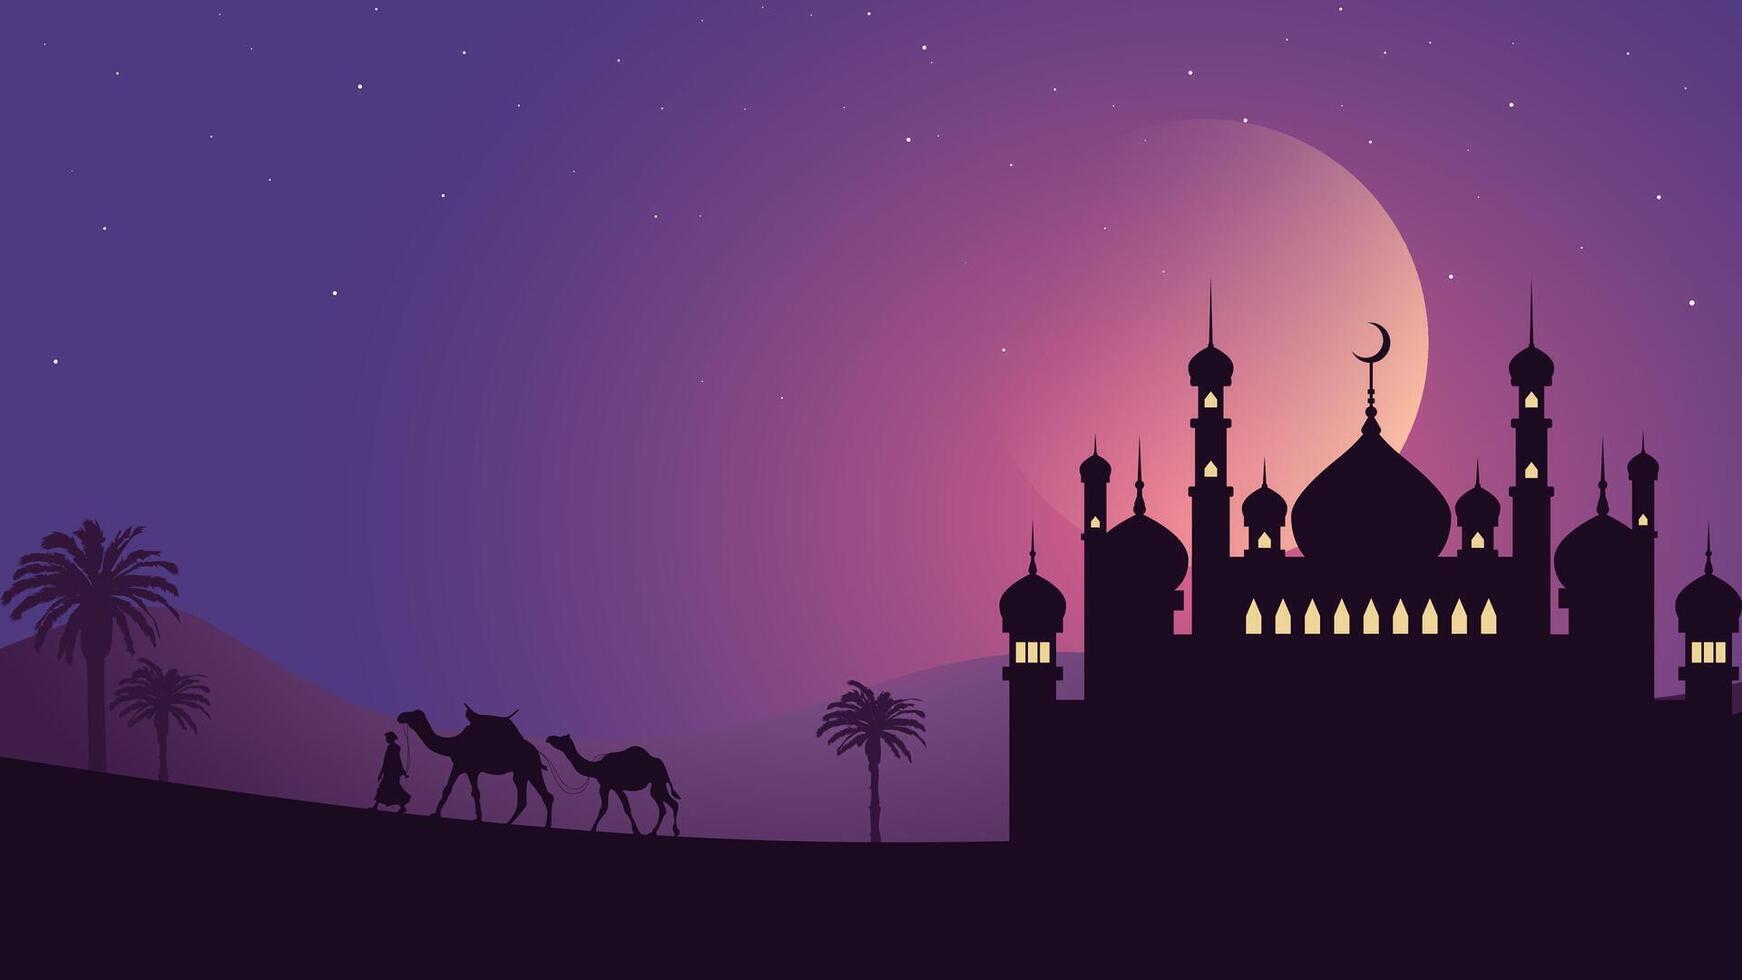 background with silhouettes of people, camels and a beautiful mosque at night vector